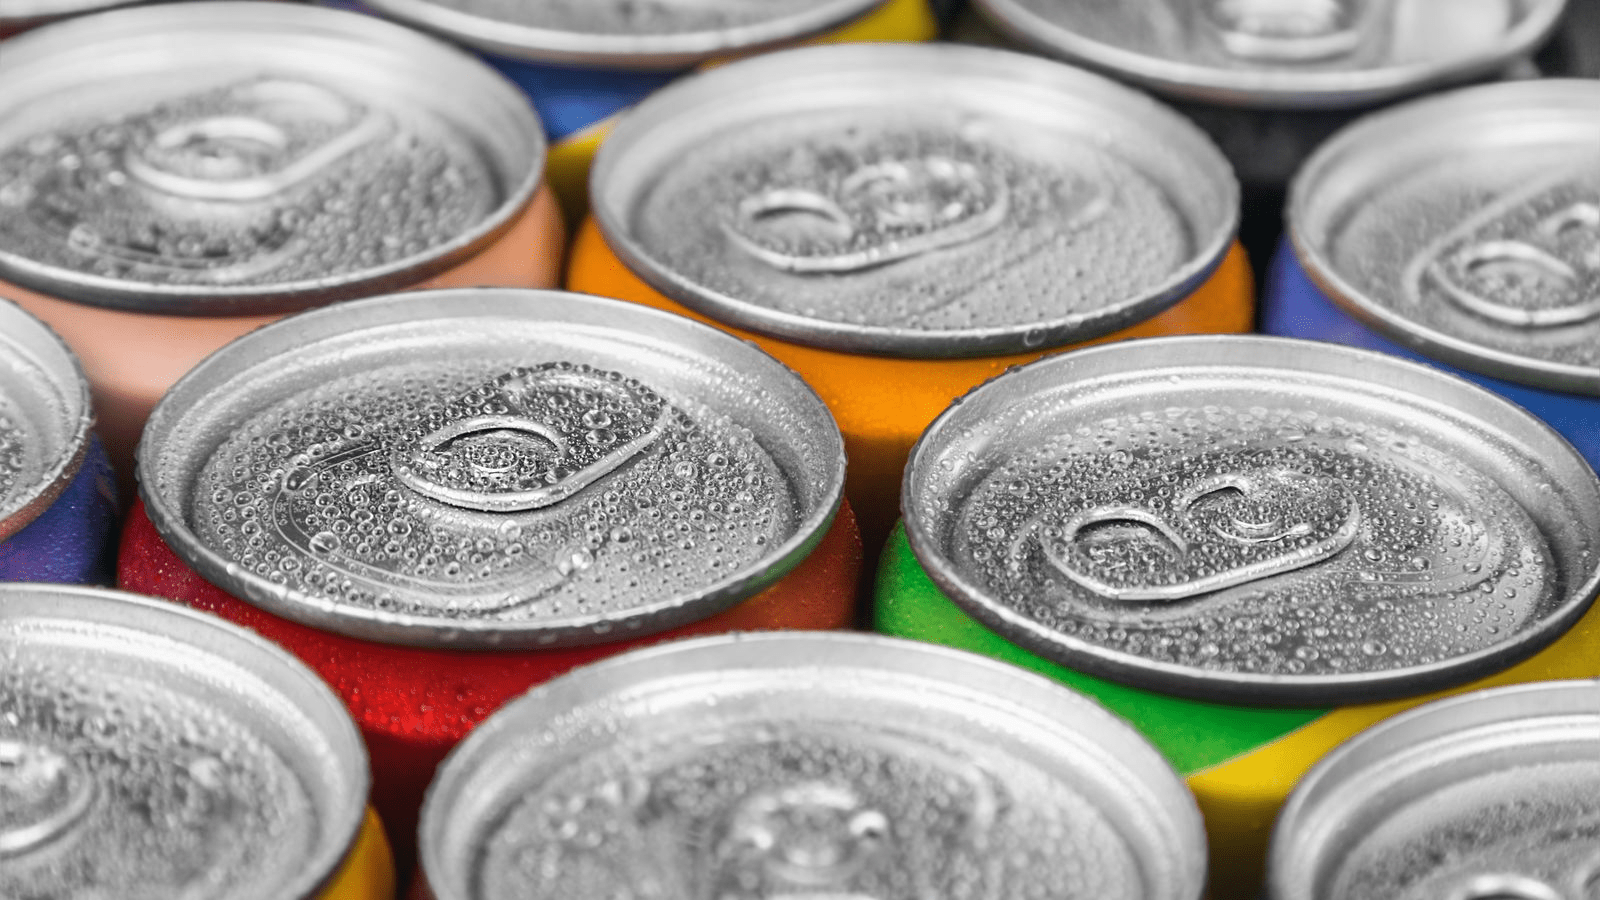 You are currently viewing Artificial sweetener found in diet soft drinks ‘has an unexpected effect on immune system’ – study